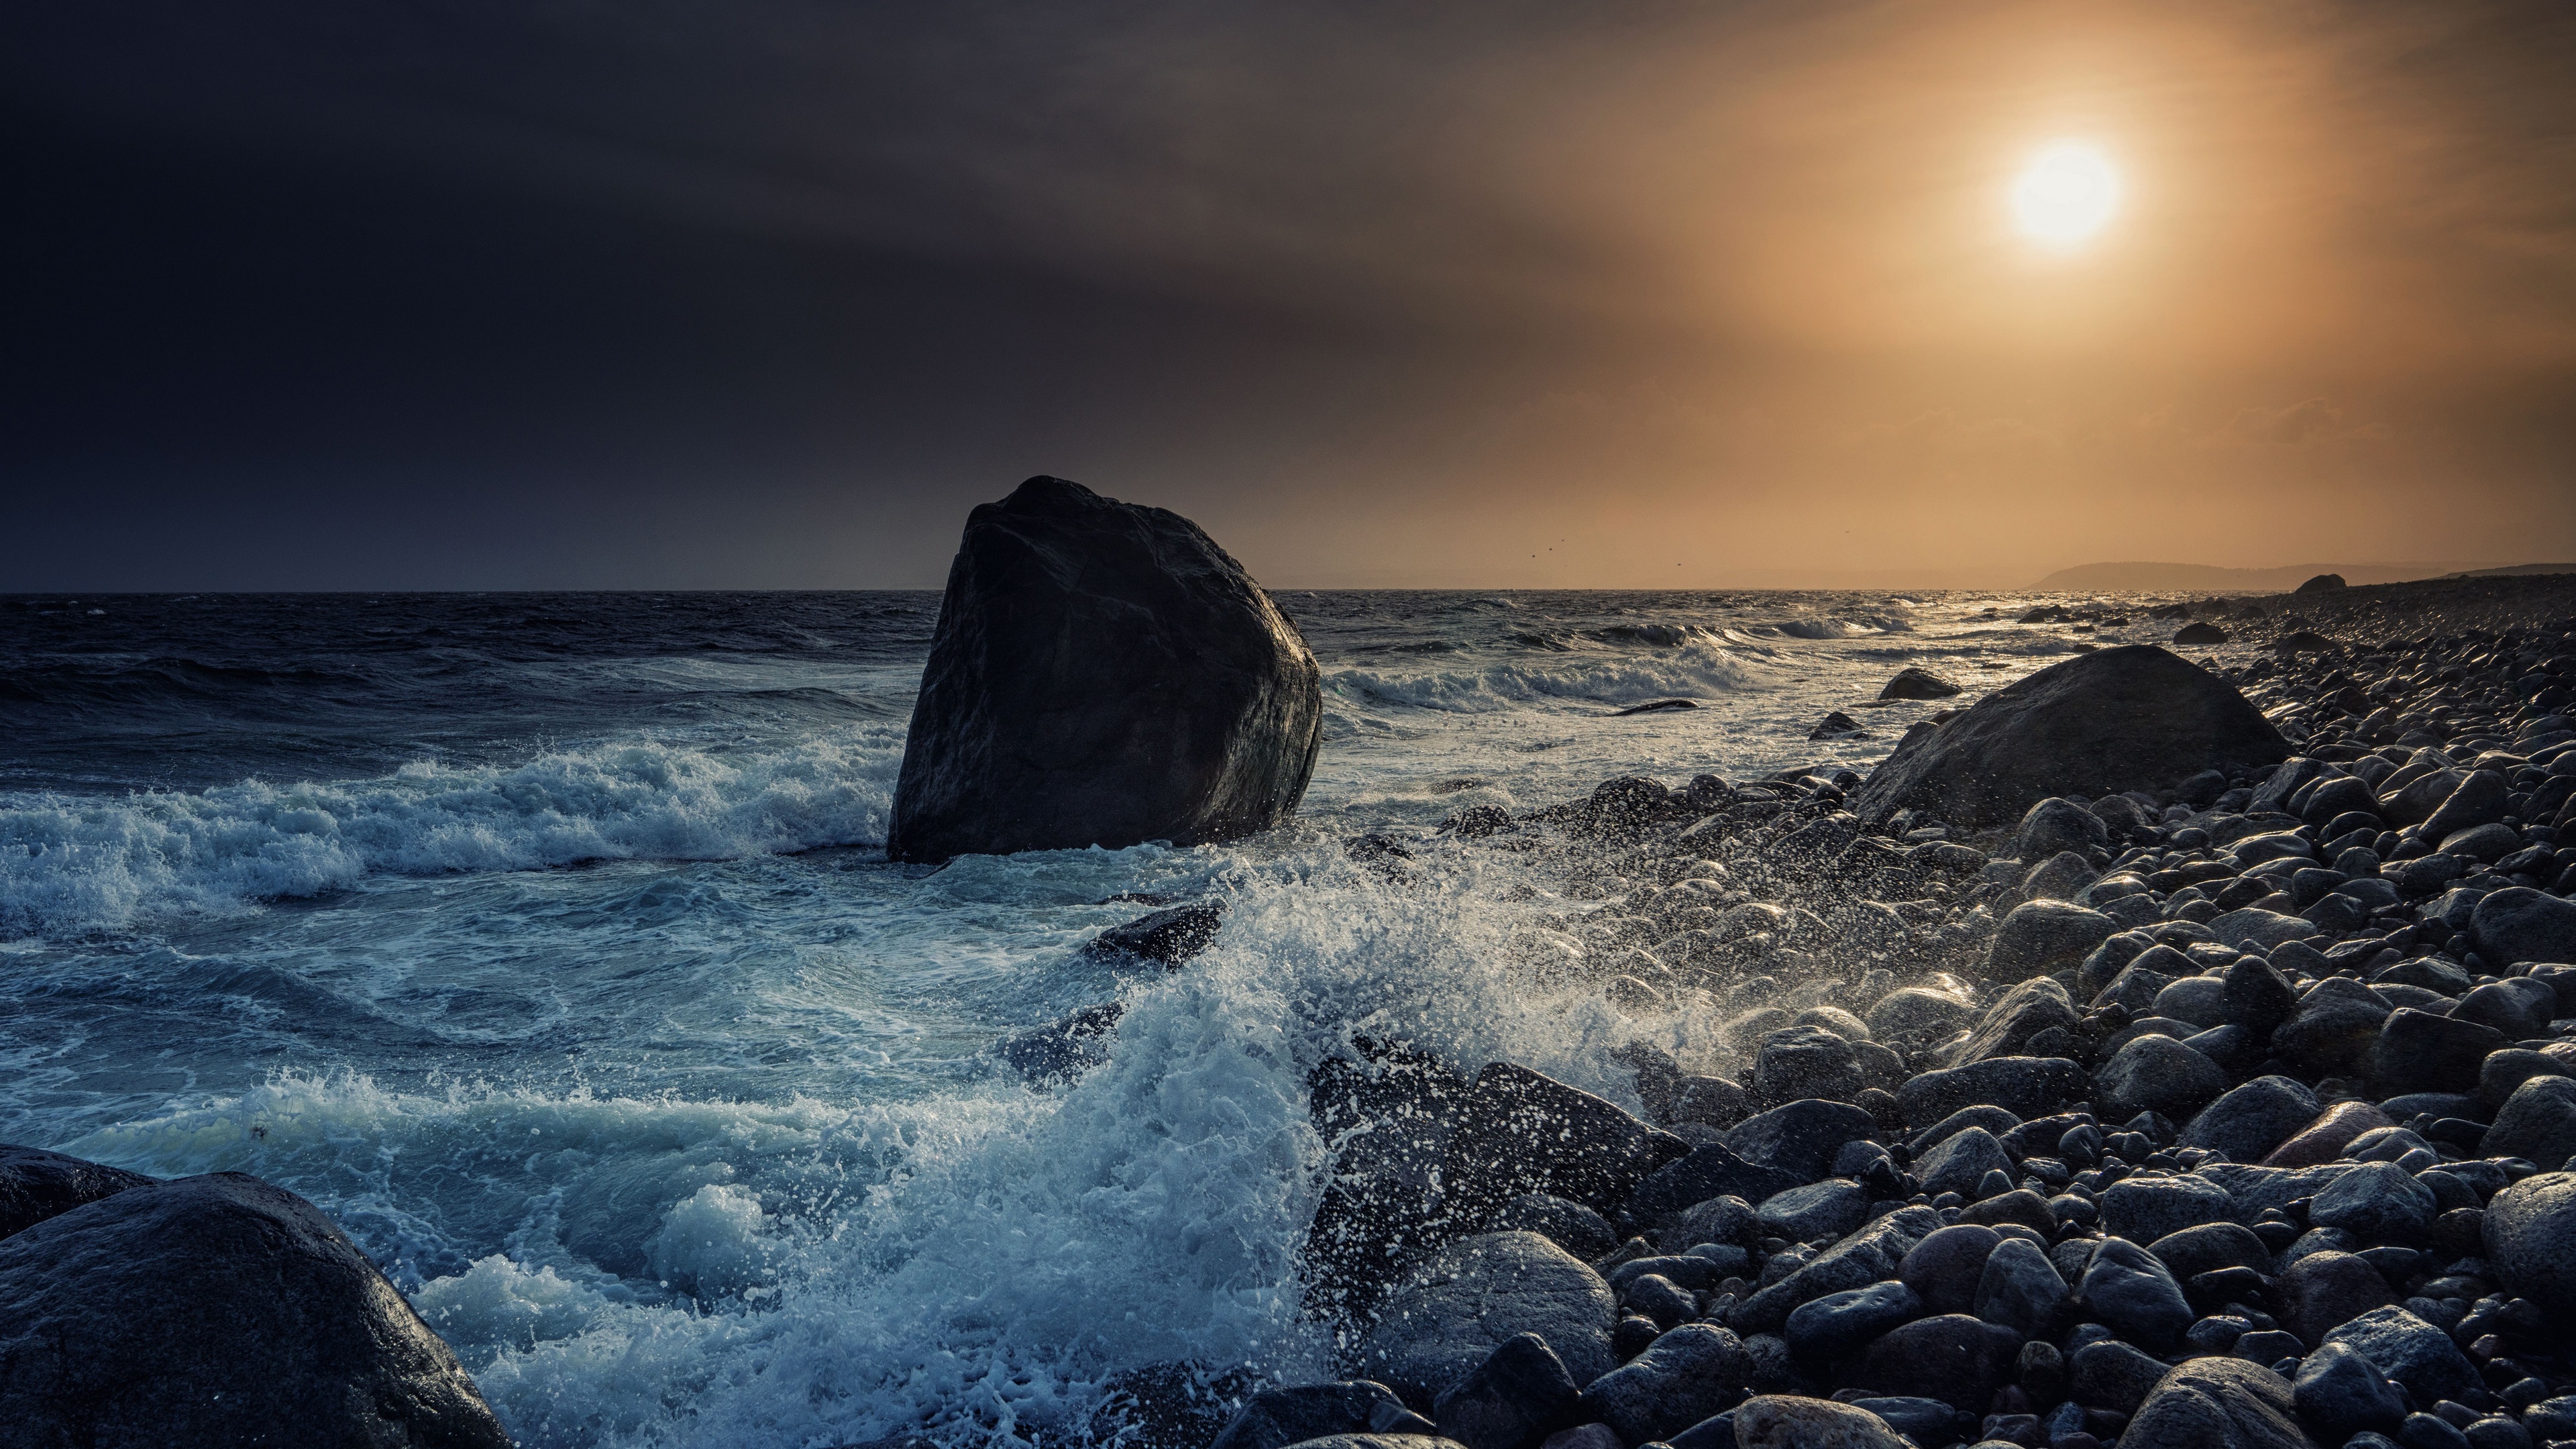 General 3840x2160 Norway nature sea coast waves storm stones rocks sky clouds sunset water